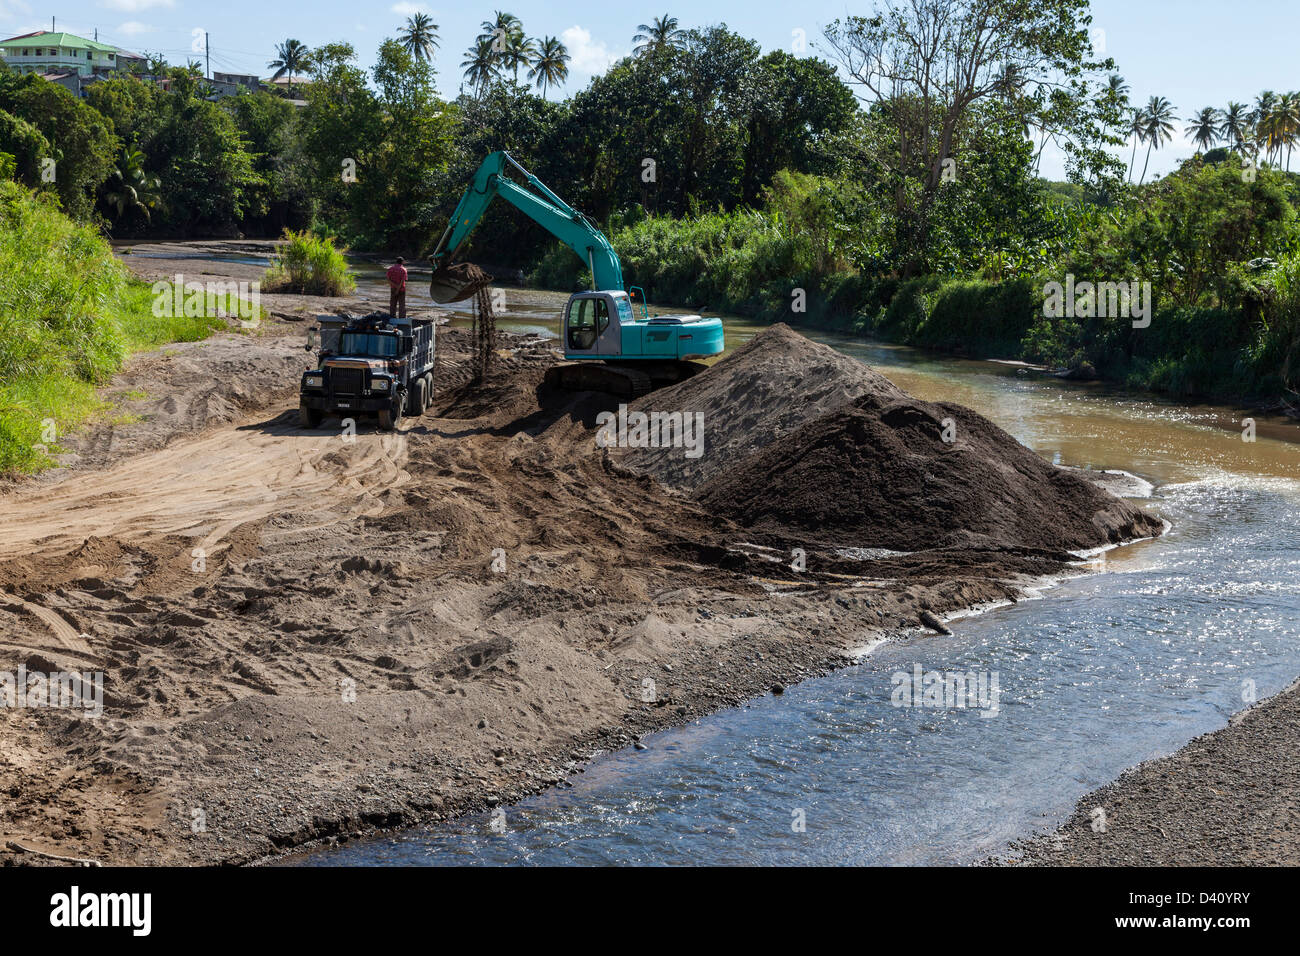 Digger removing gravel from a river bed, Micoud, St Lucia Stock Photo